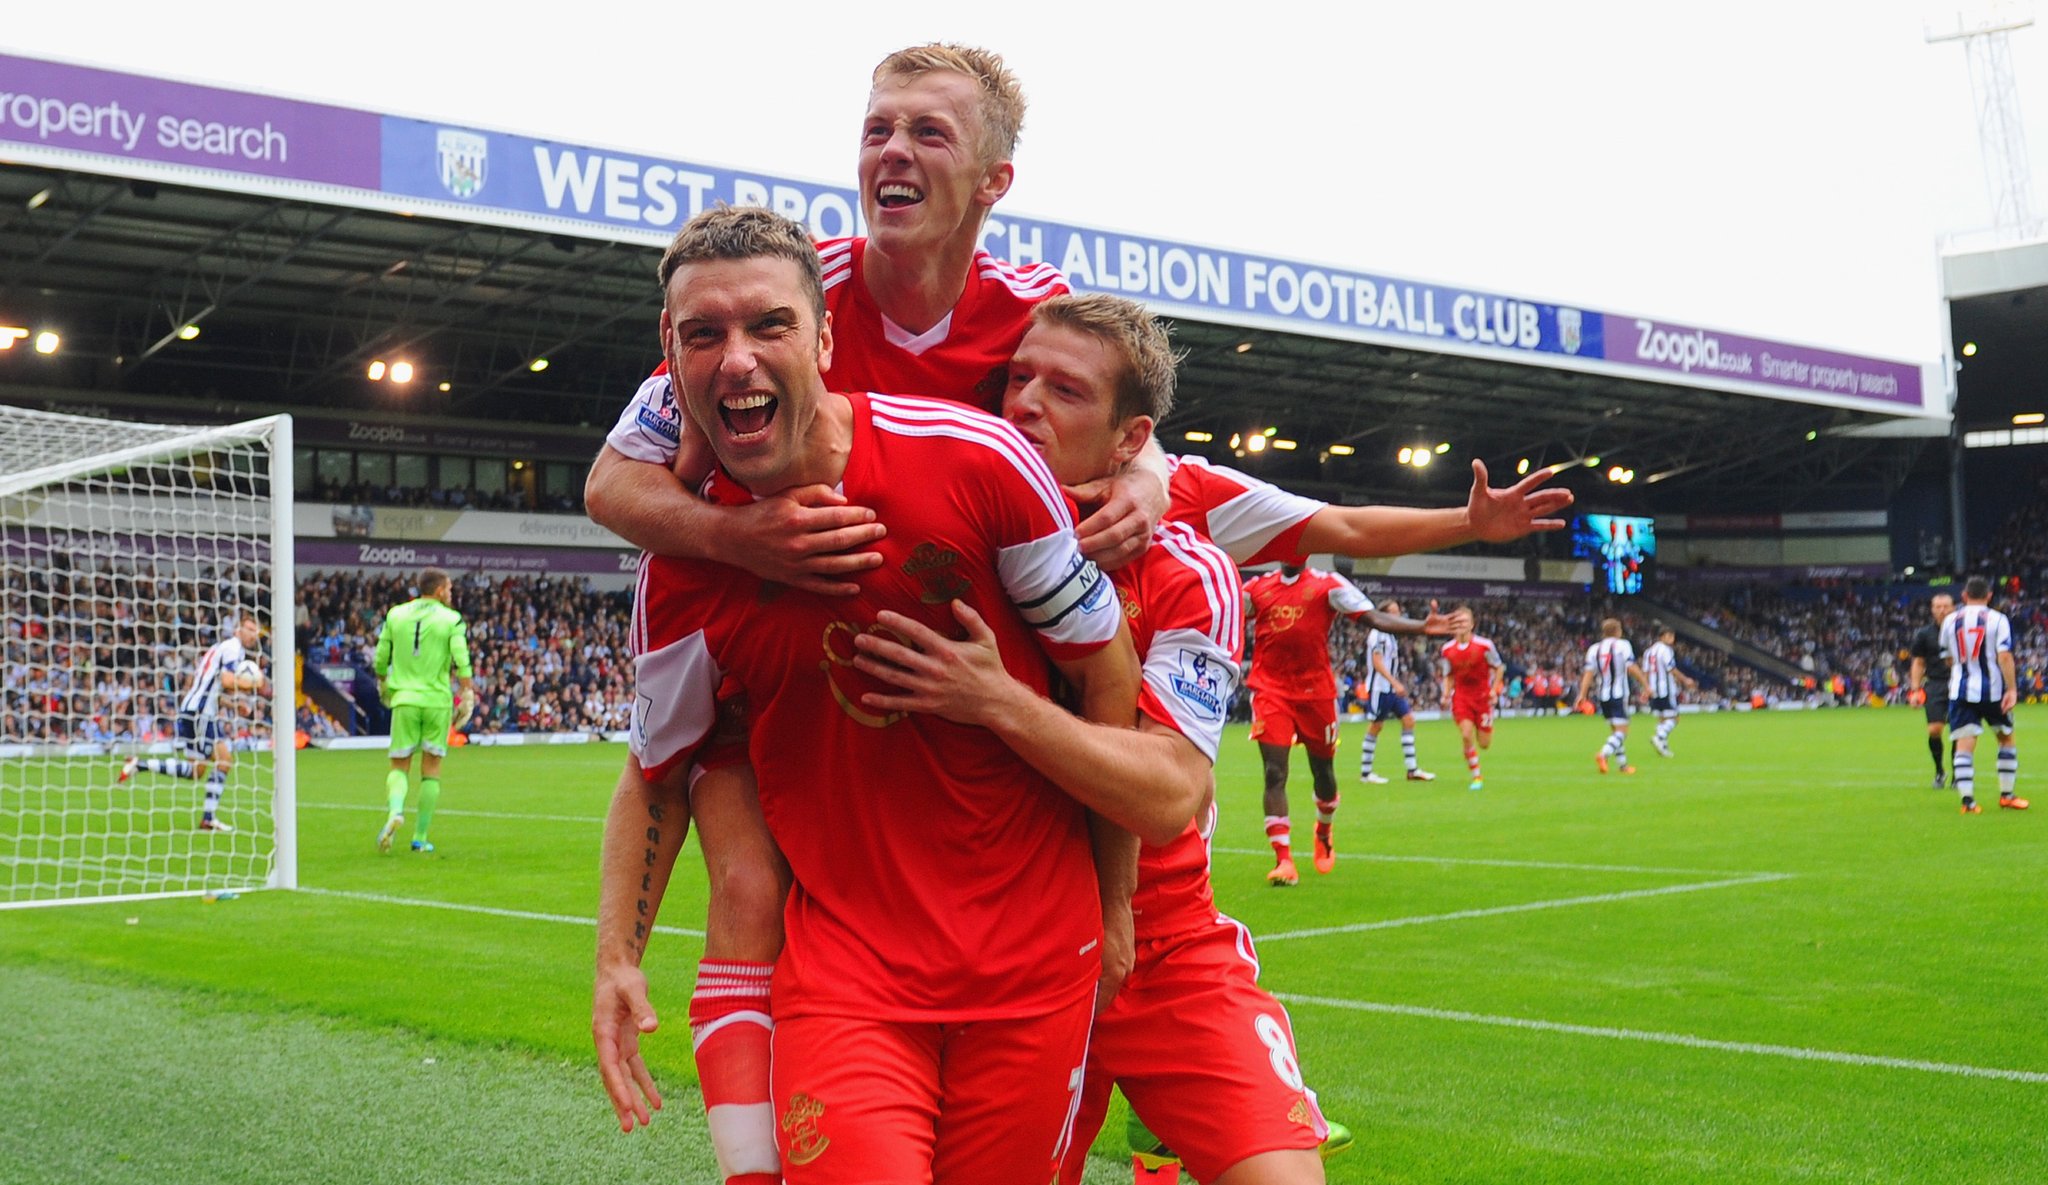 Happy birthday, Rickie Lambert! The legend turns 38 today.

Thank you for the memories... 